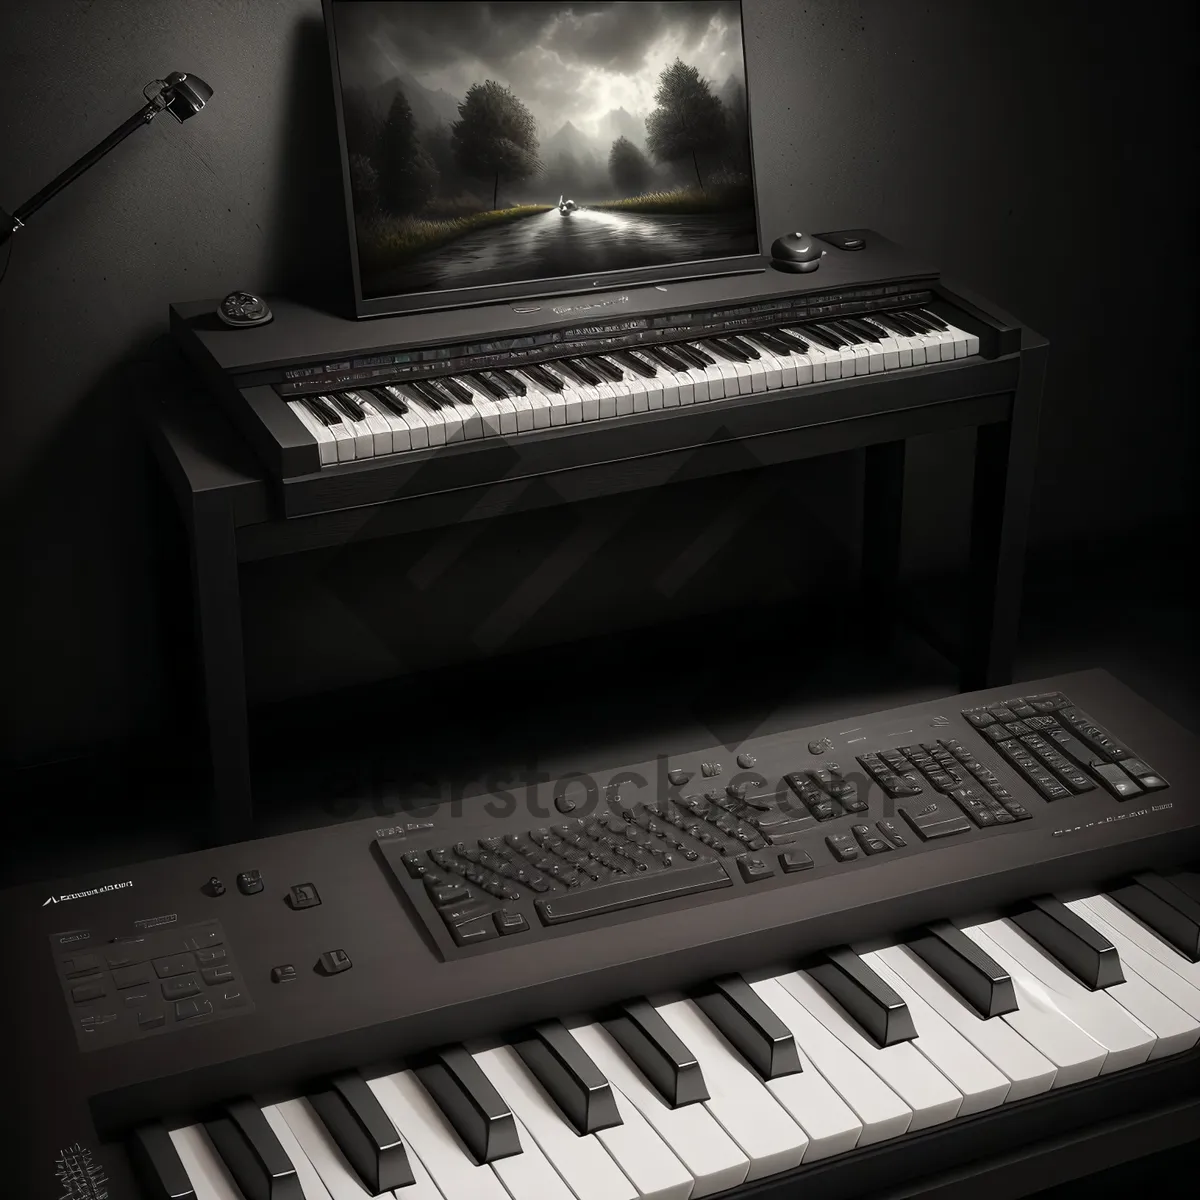 Picture of Piano keyboard instrument with black keys